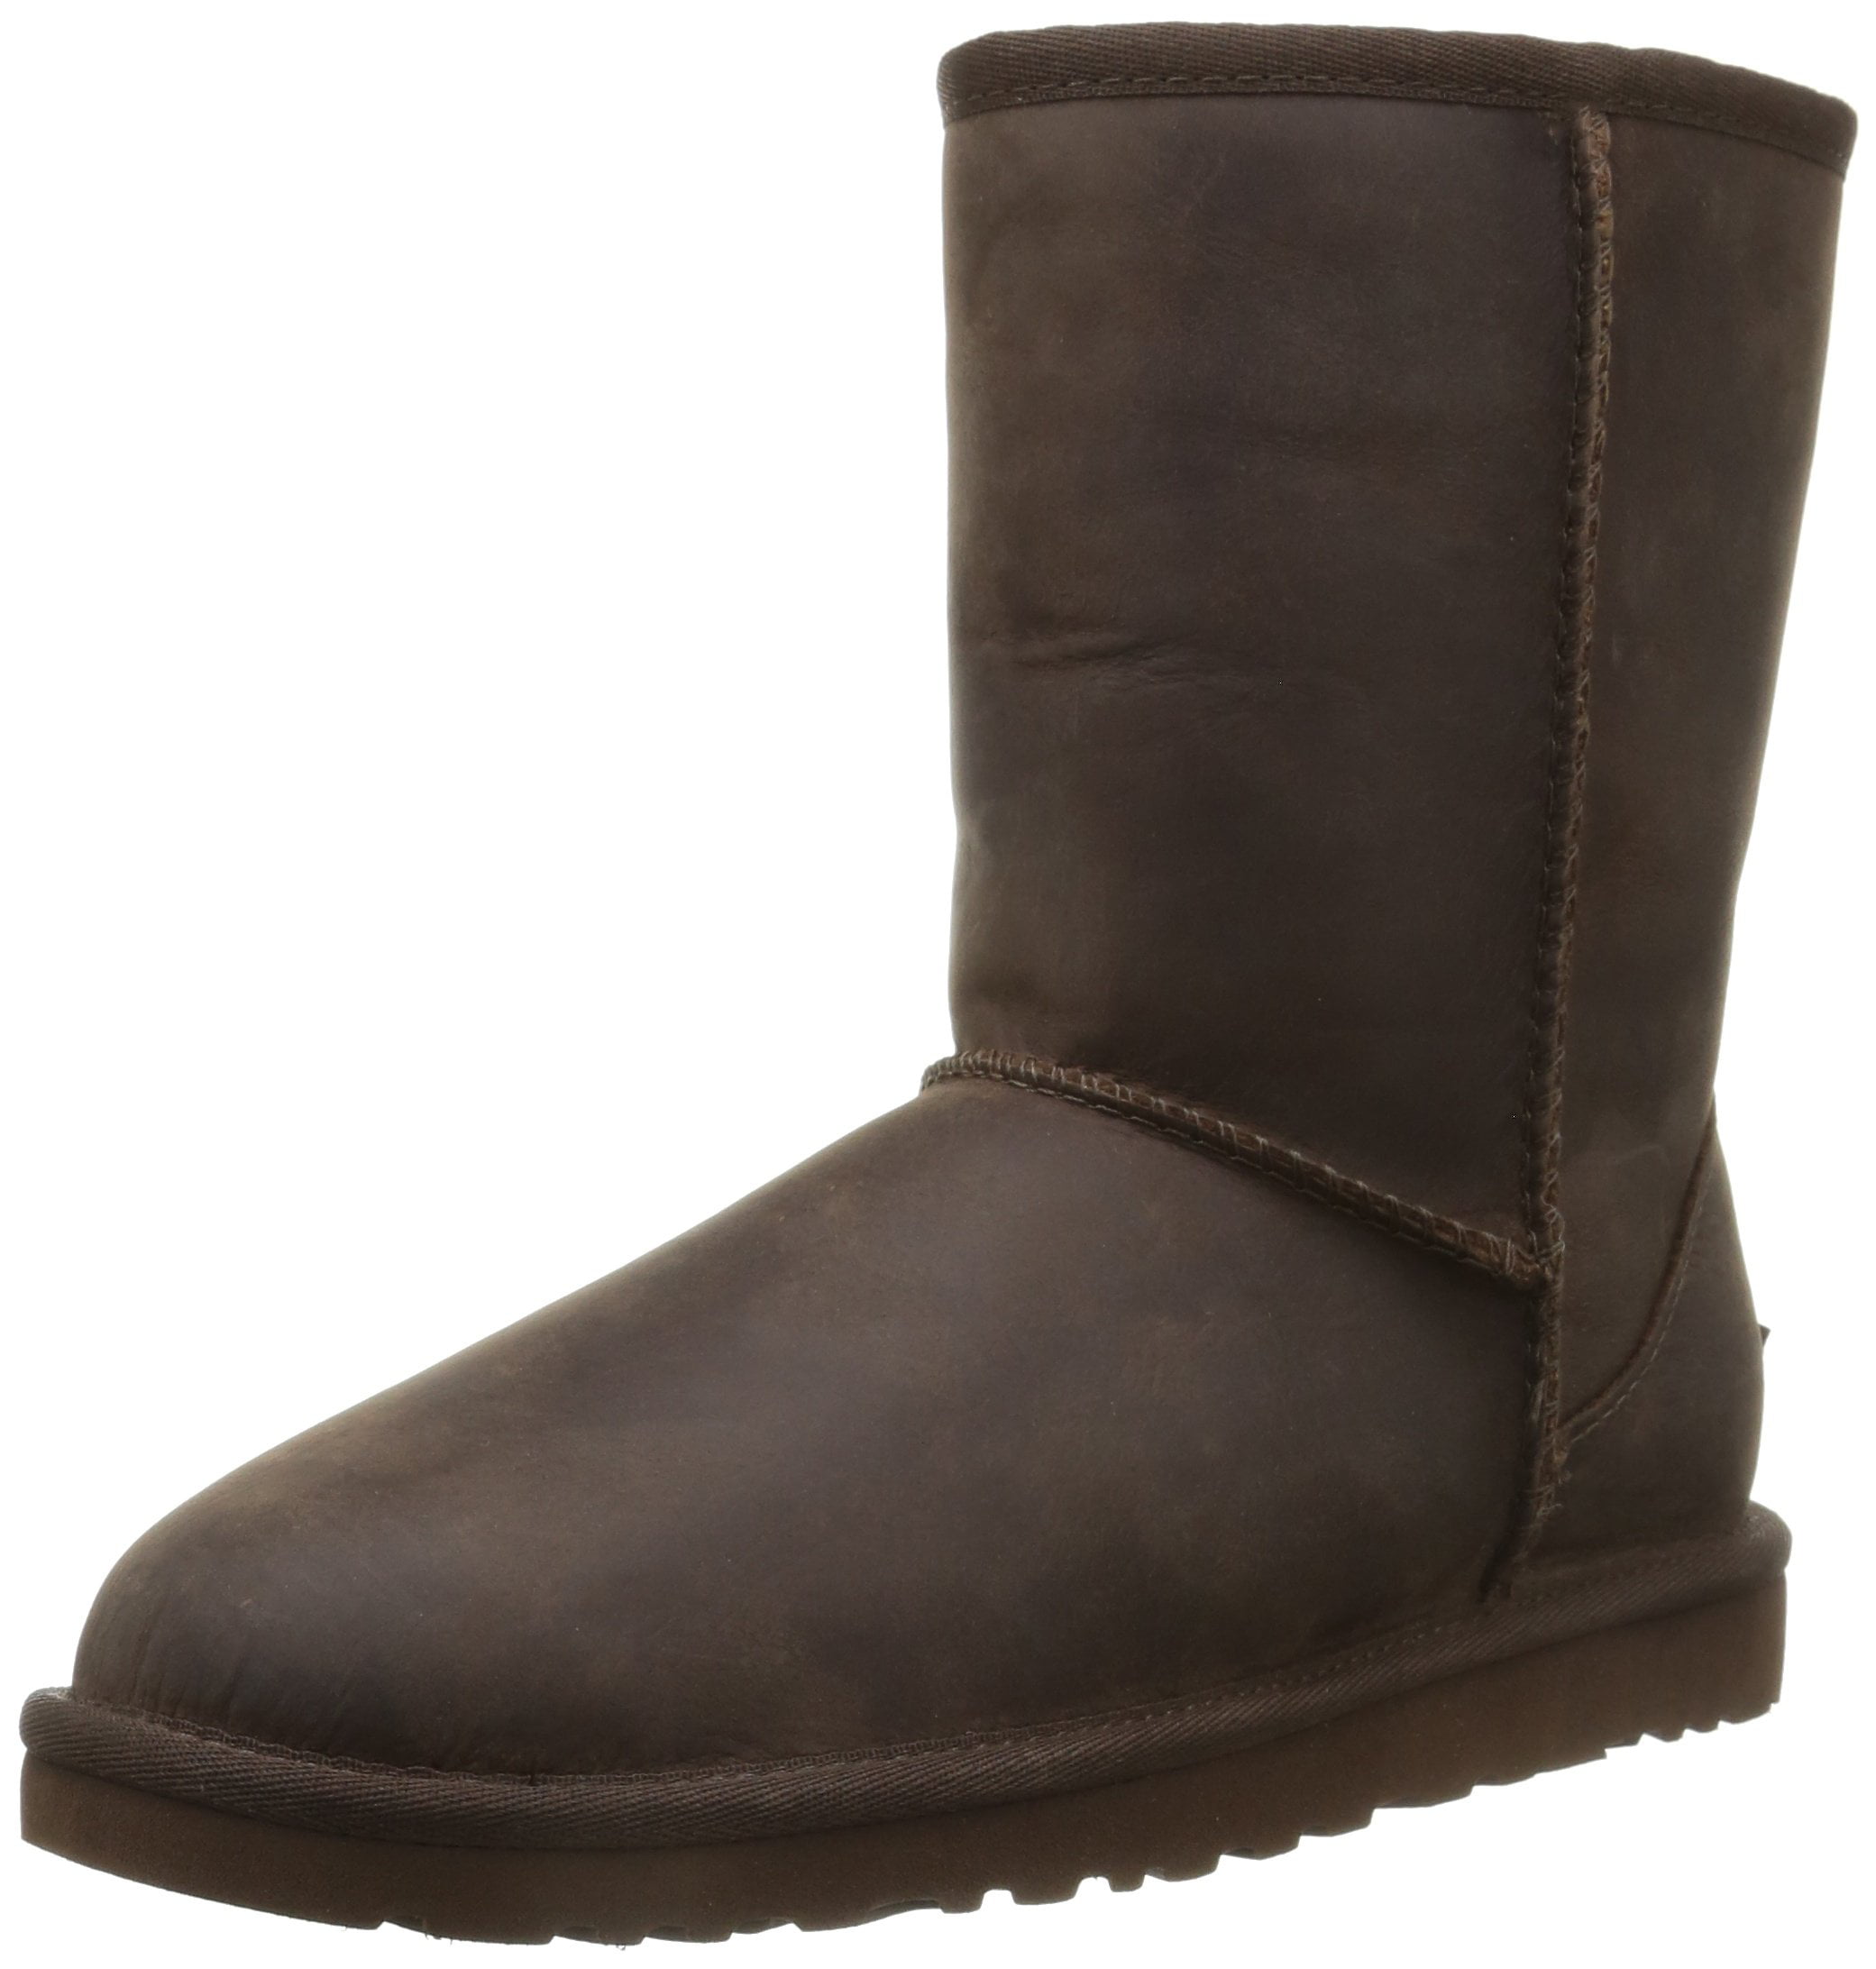 classic short leather boot